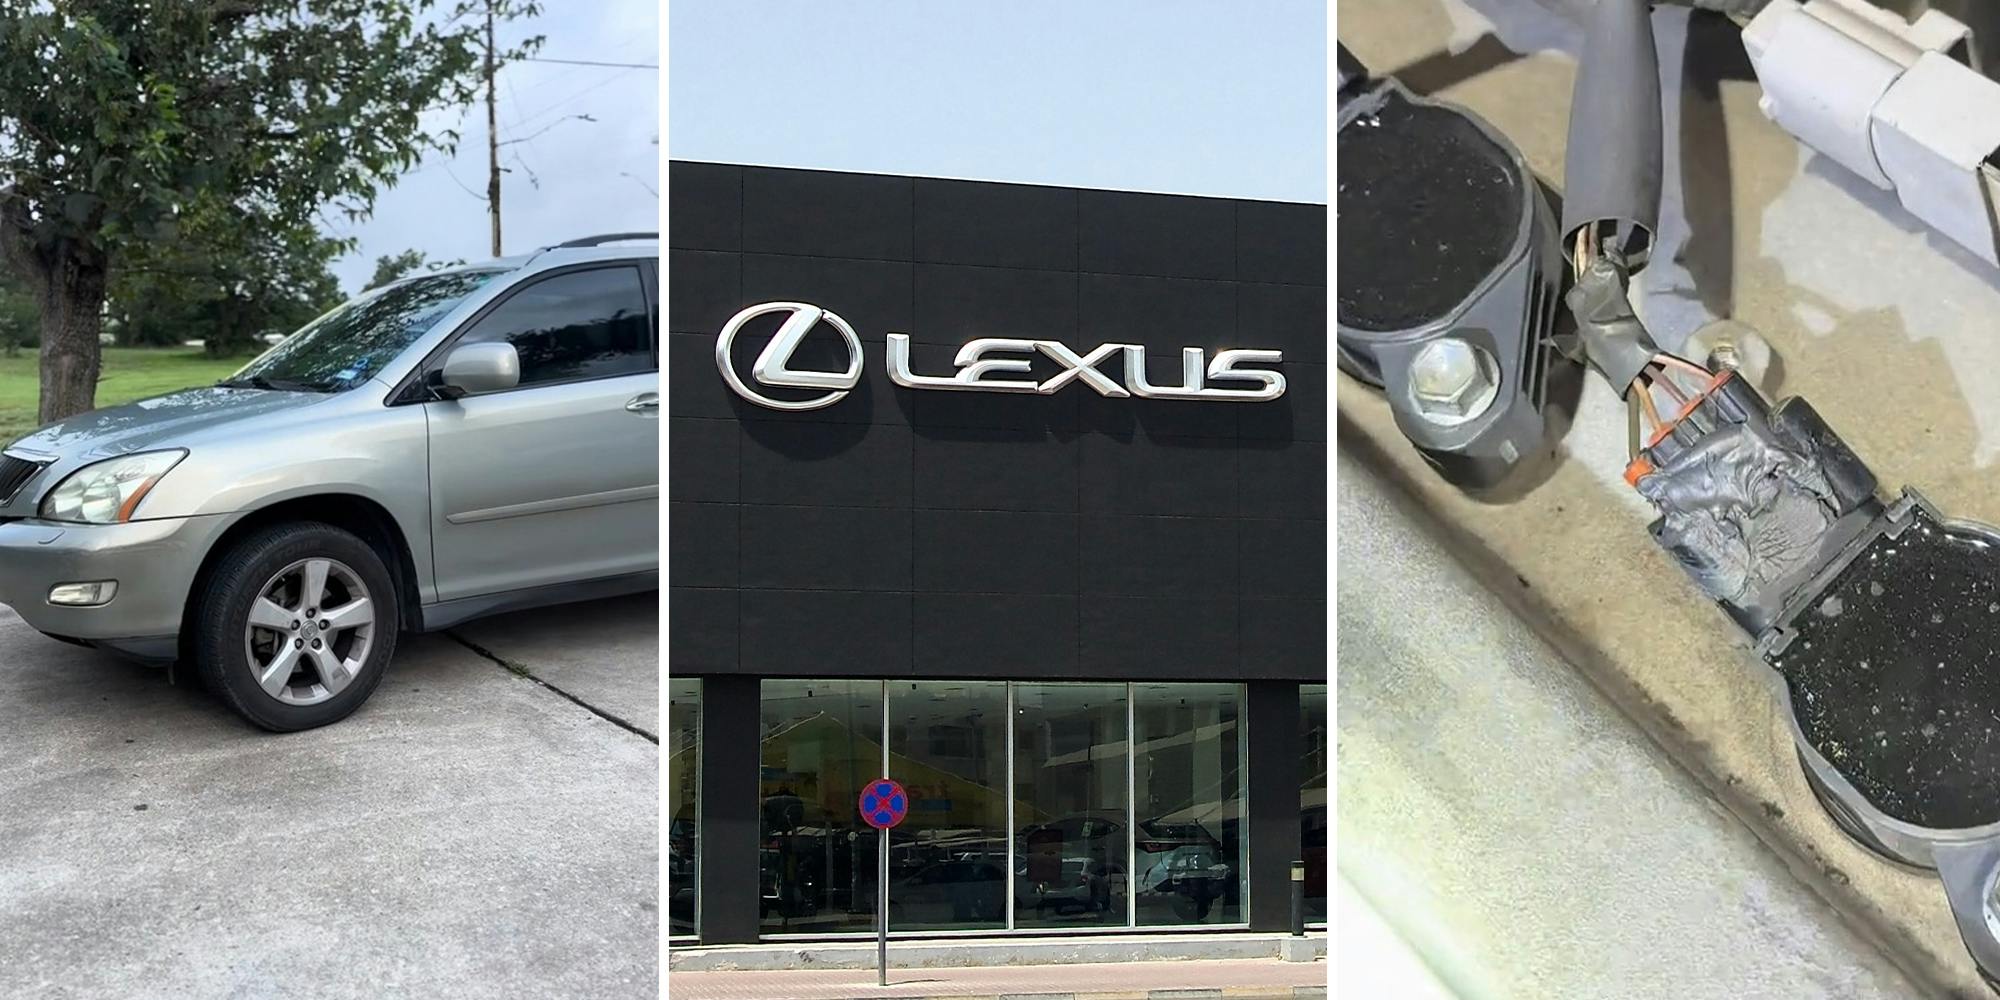 Mechanic discovers the real reason this 2008 Lexus keeps overheating